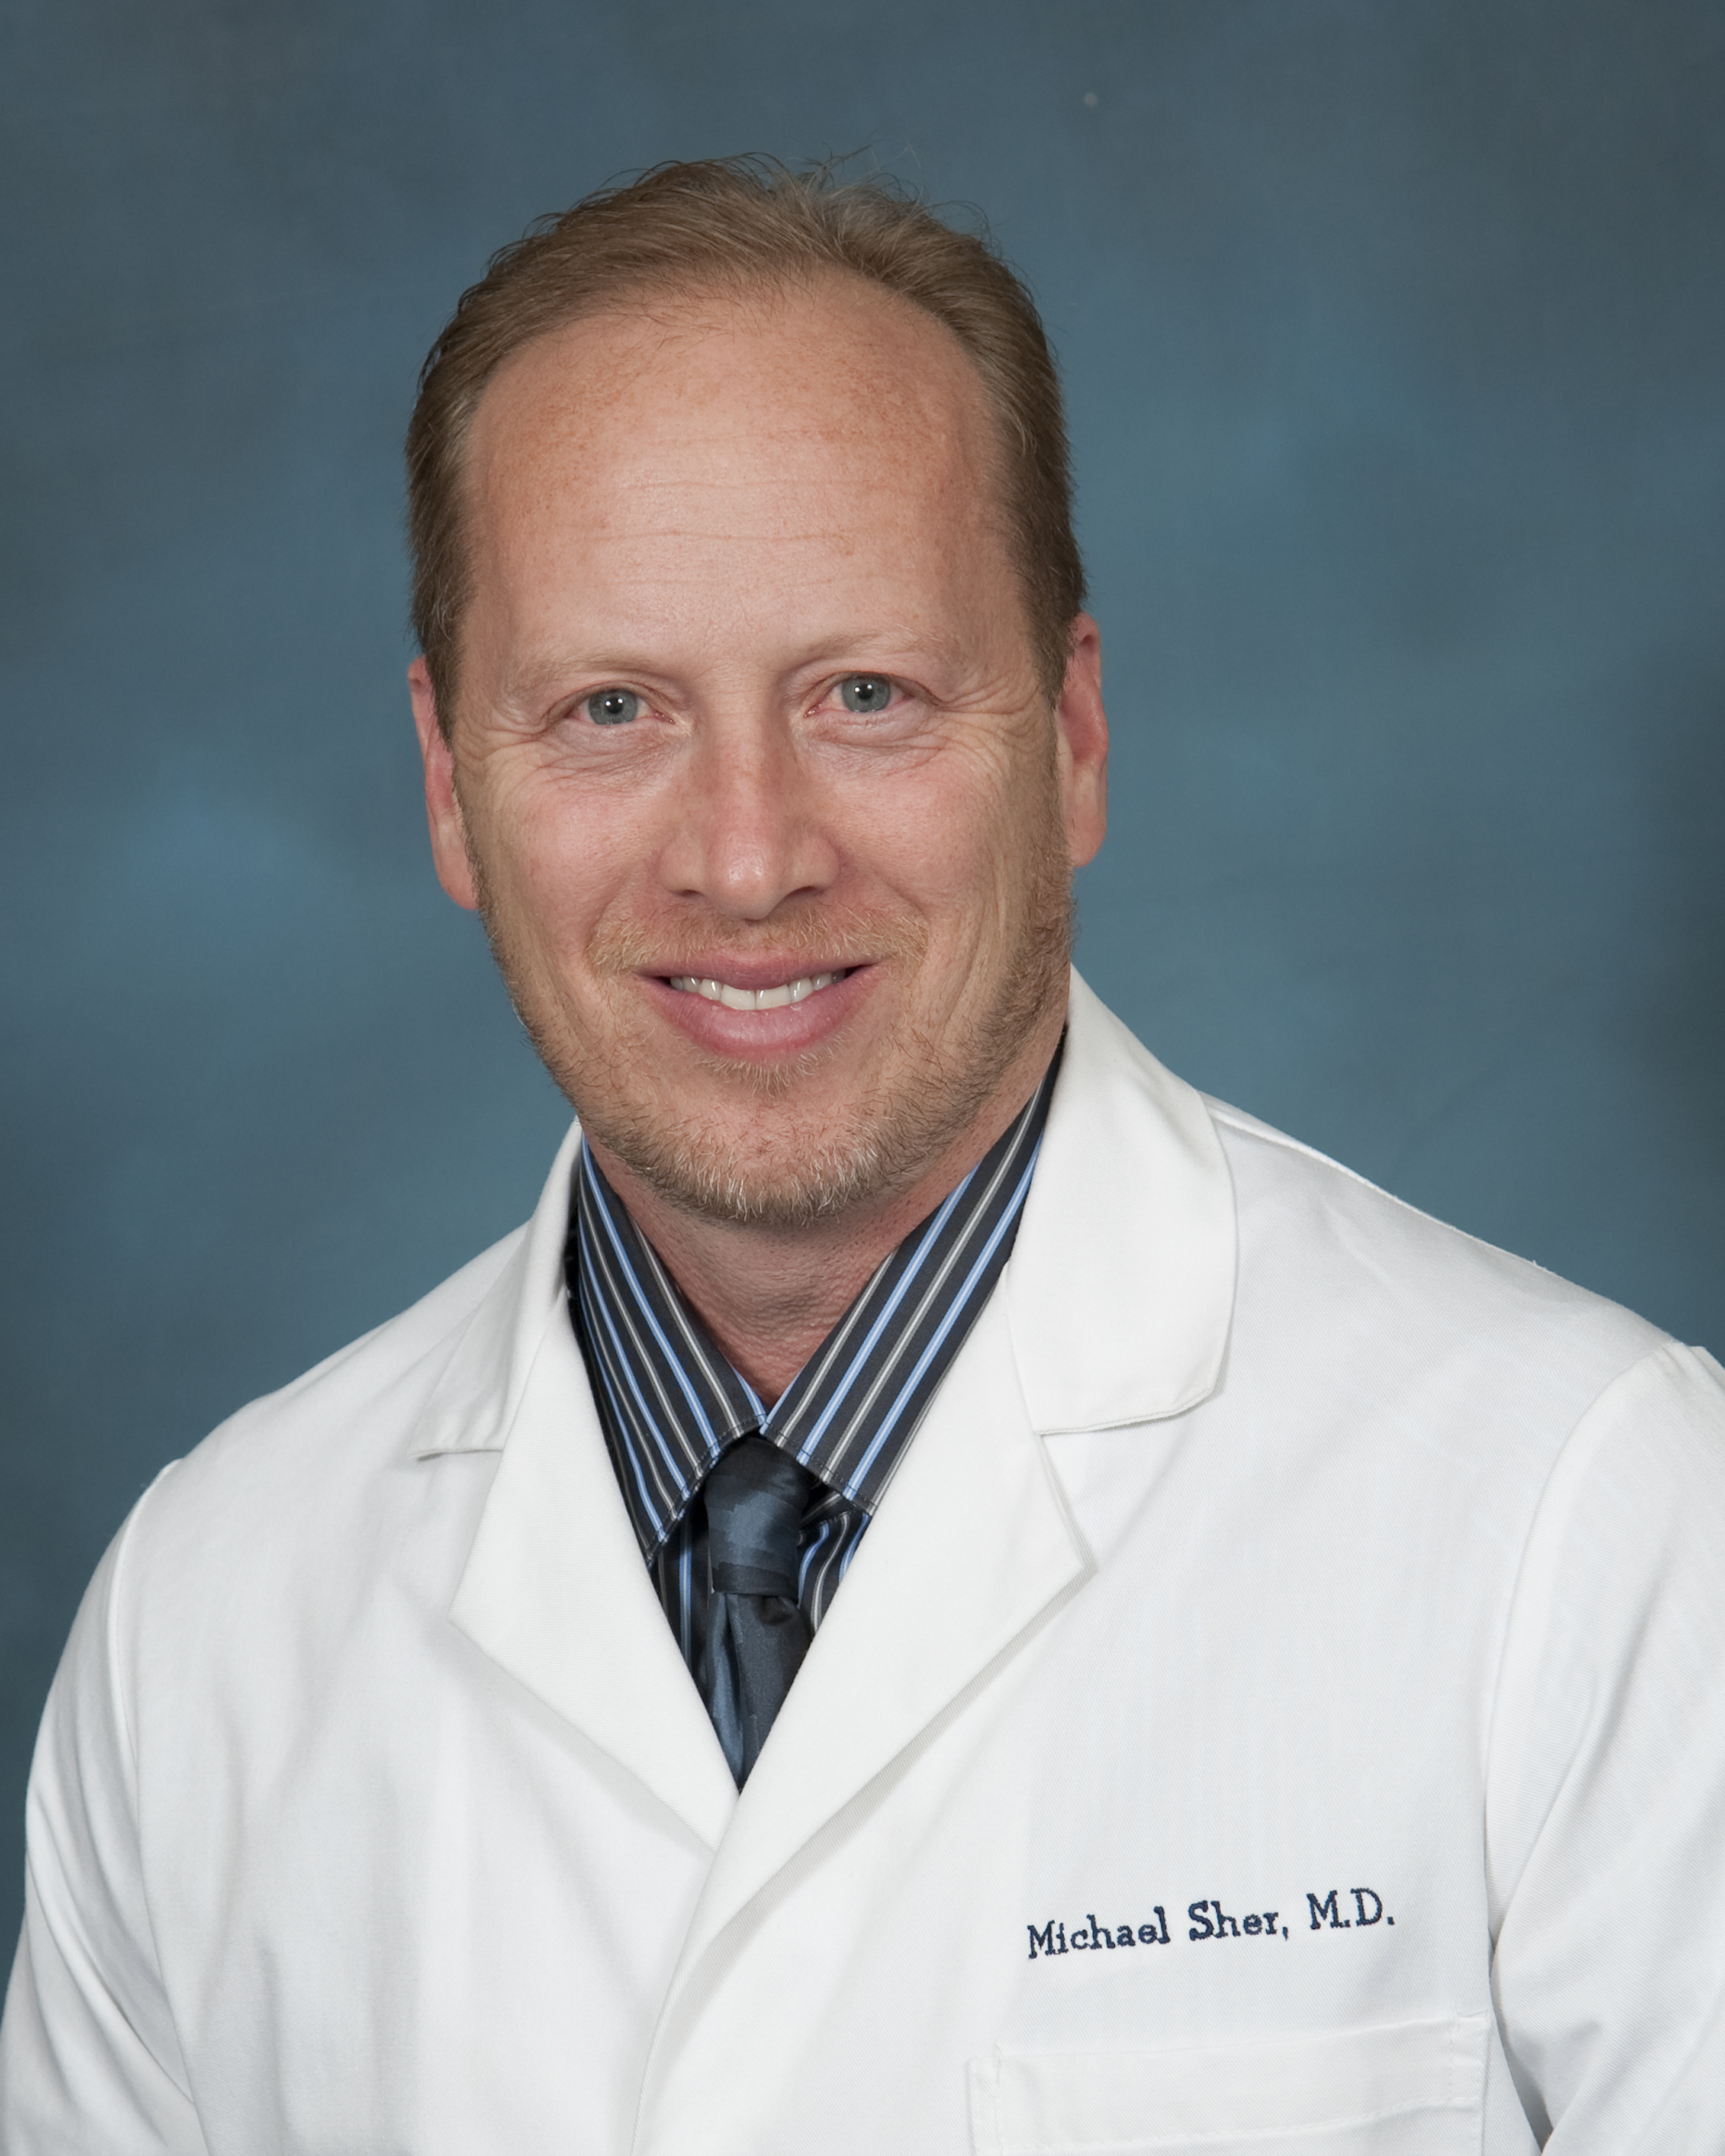 Michael Sher, MD